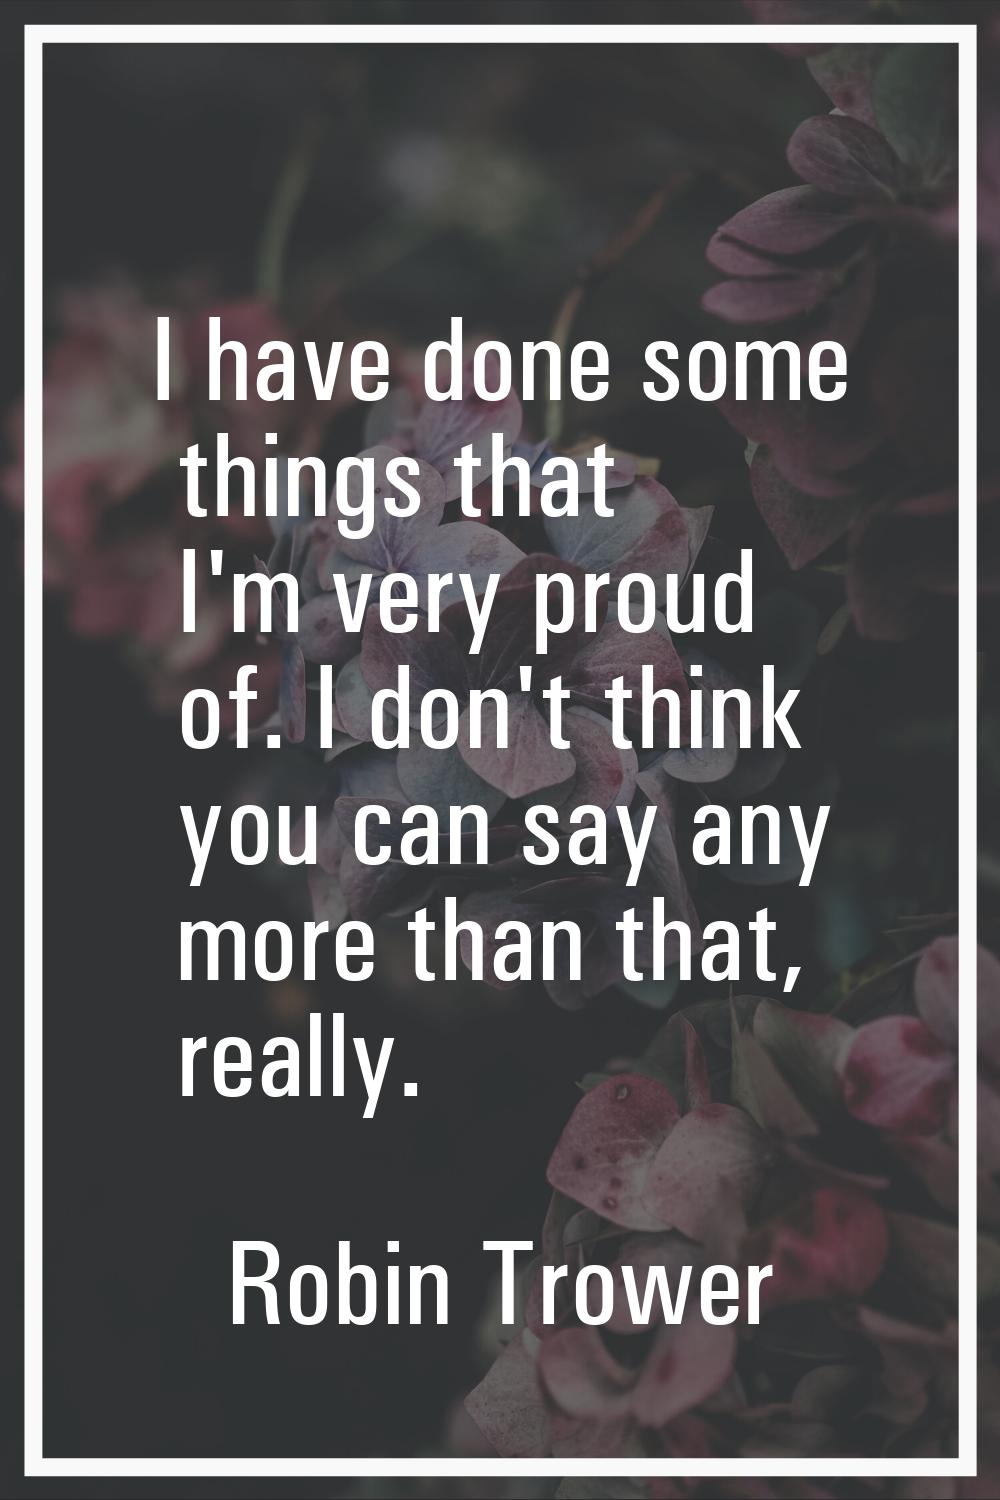 I have done some things that I'm very proud of. I don't think you can say any more than that, reall